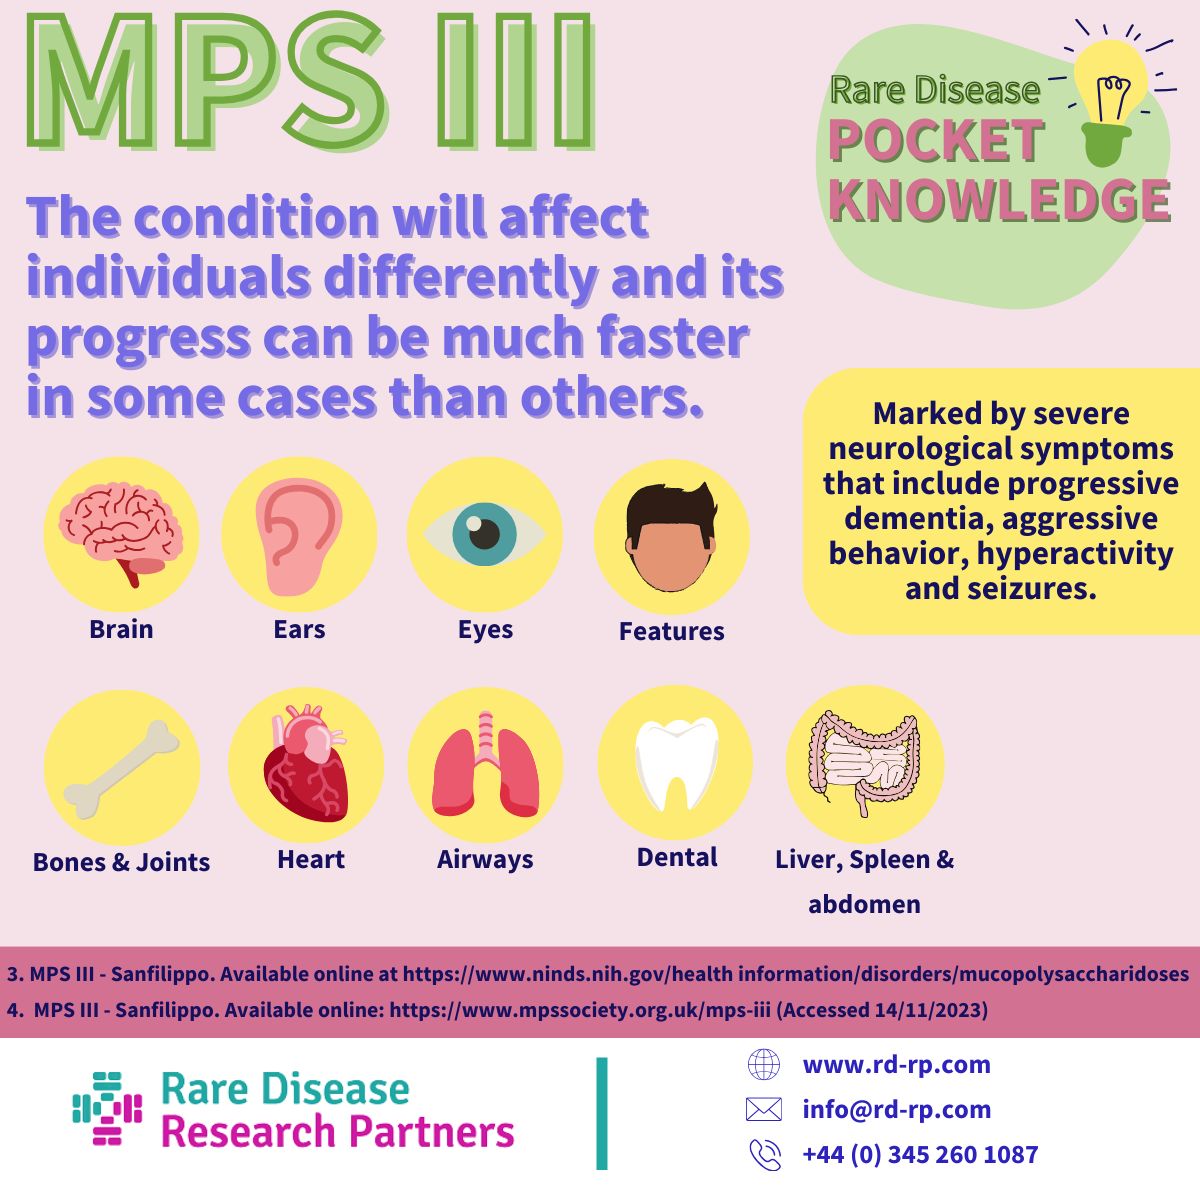 Our aim with the pocket knowledge series is to increase awareness surrounding rare diseases. In this particular installment, we focus on MPS III (Sanfilippo), a rare autosomal recessive condition. #MPSAwarenessWeek #rarediseases #research